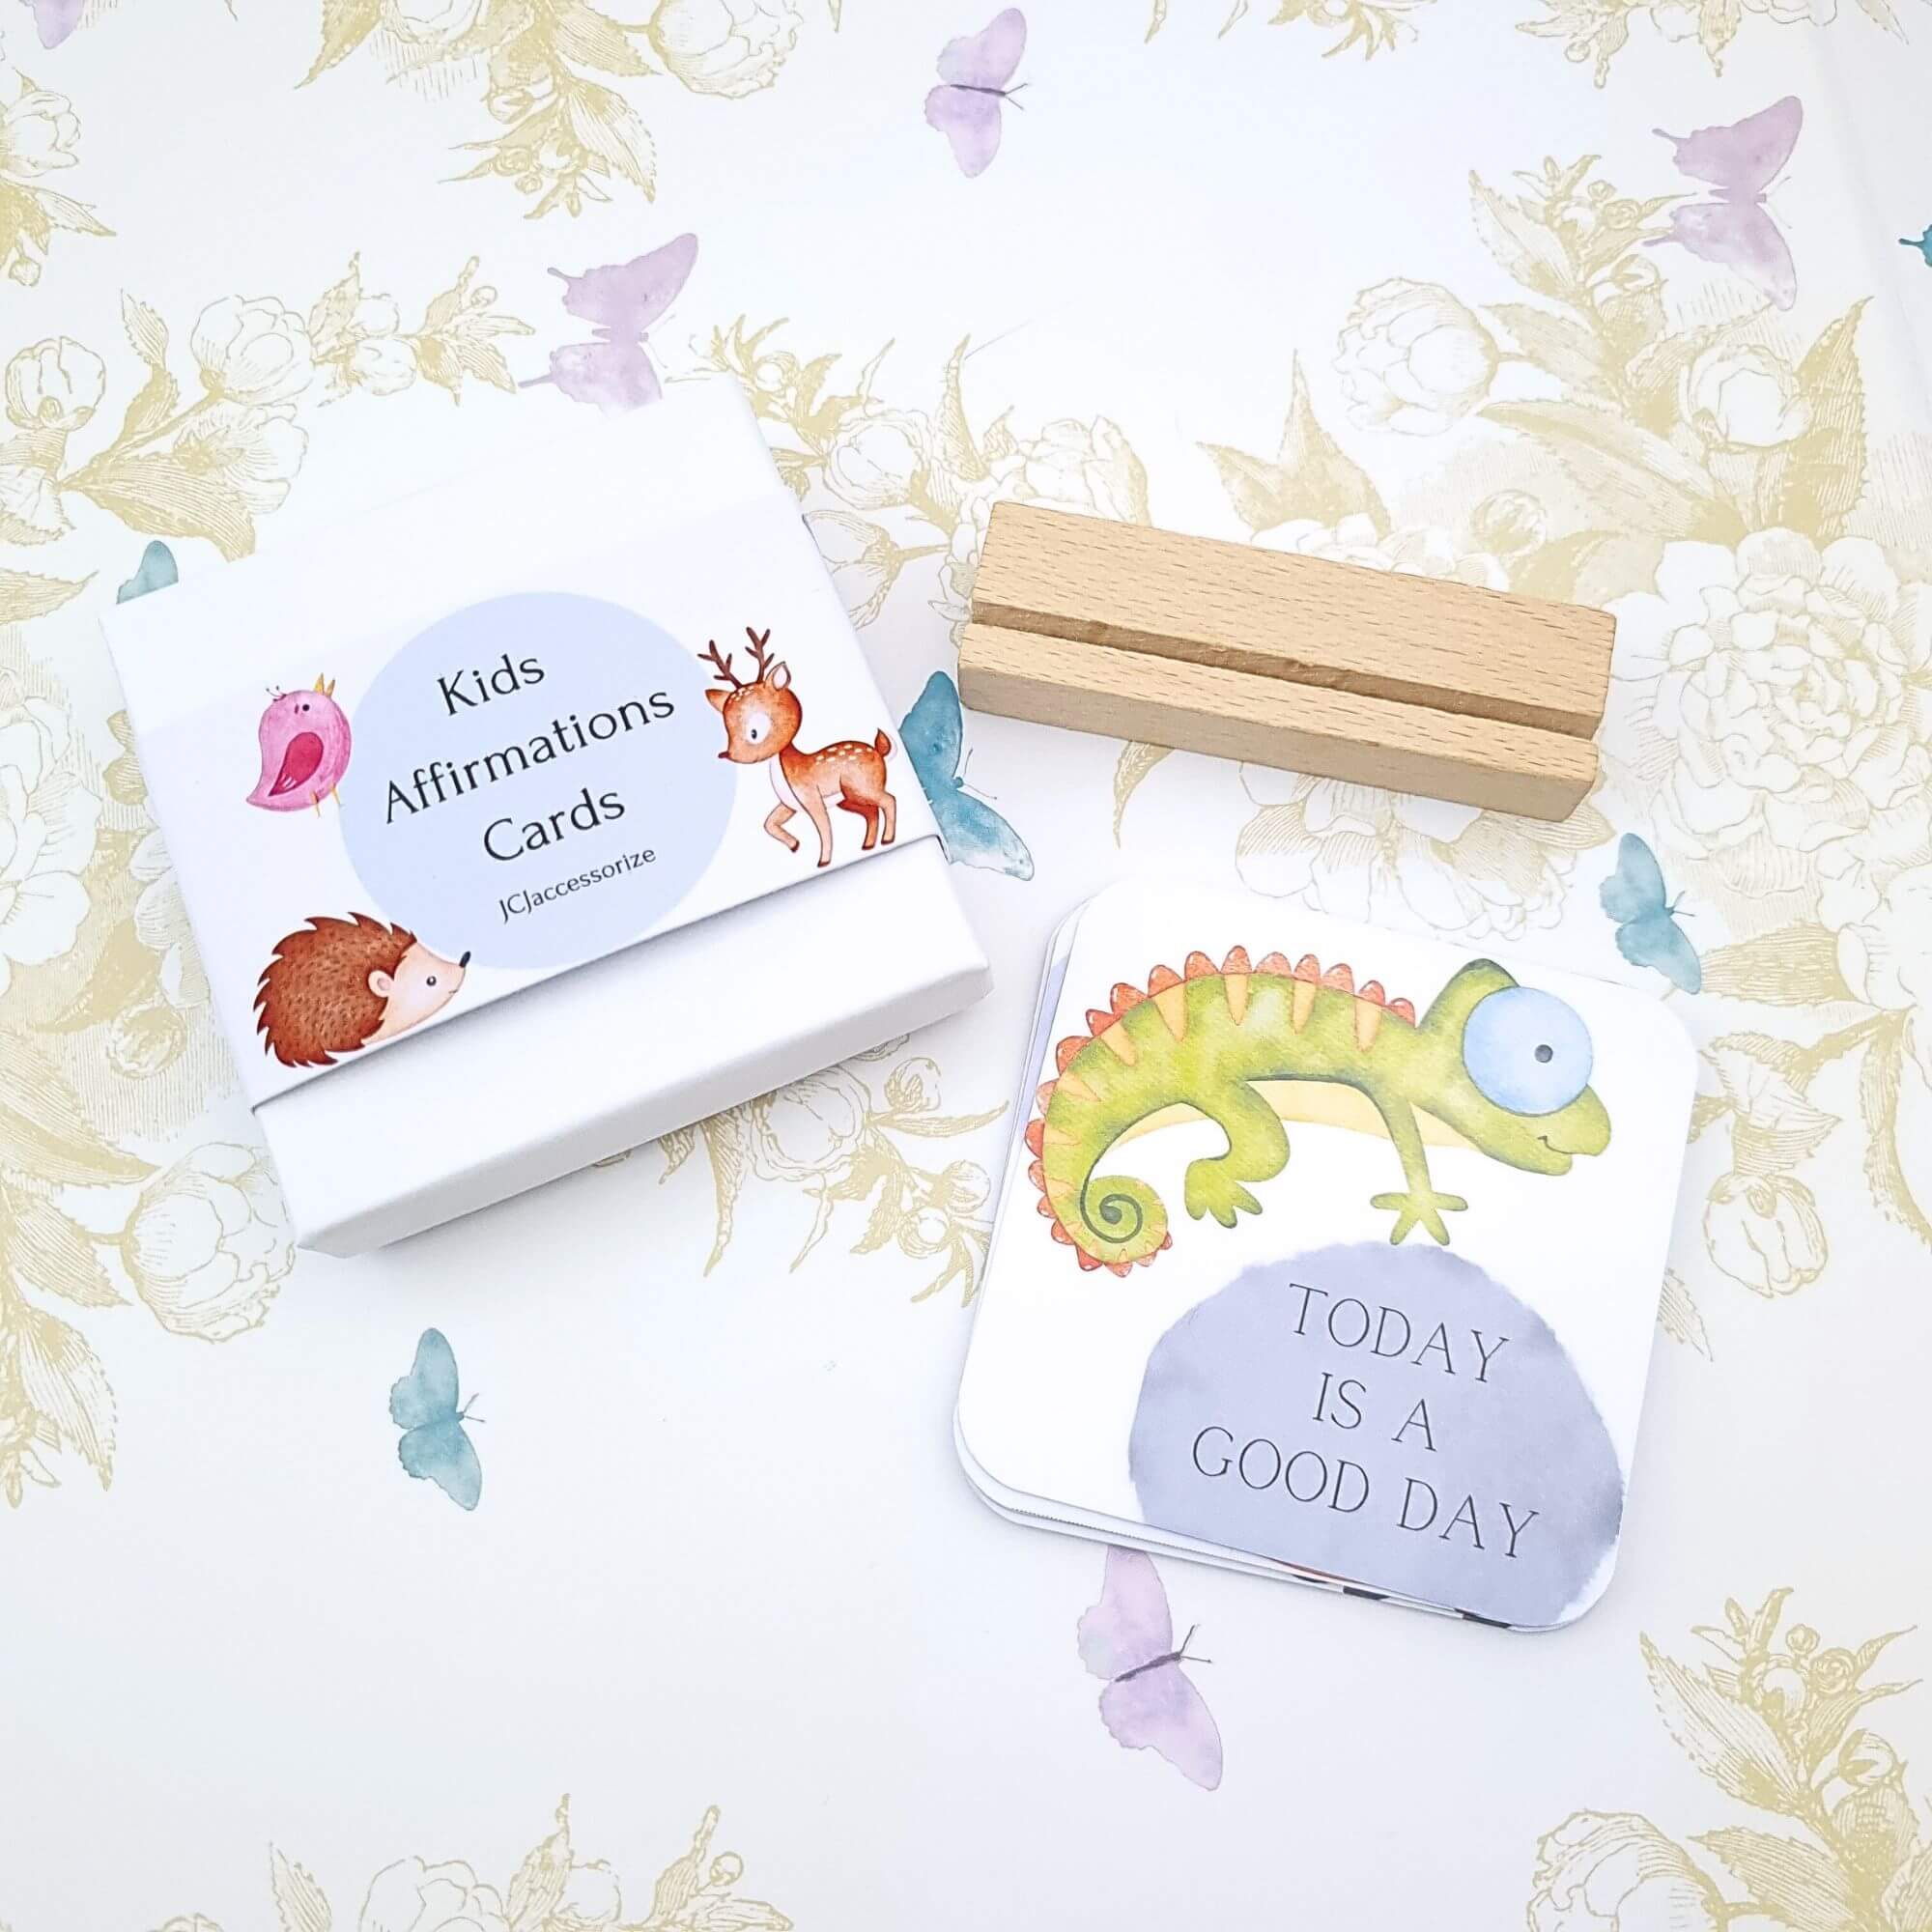 Kids affirmation cards with gift box and card stand holder